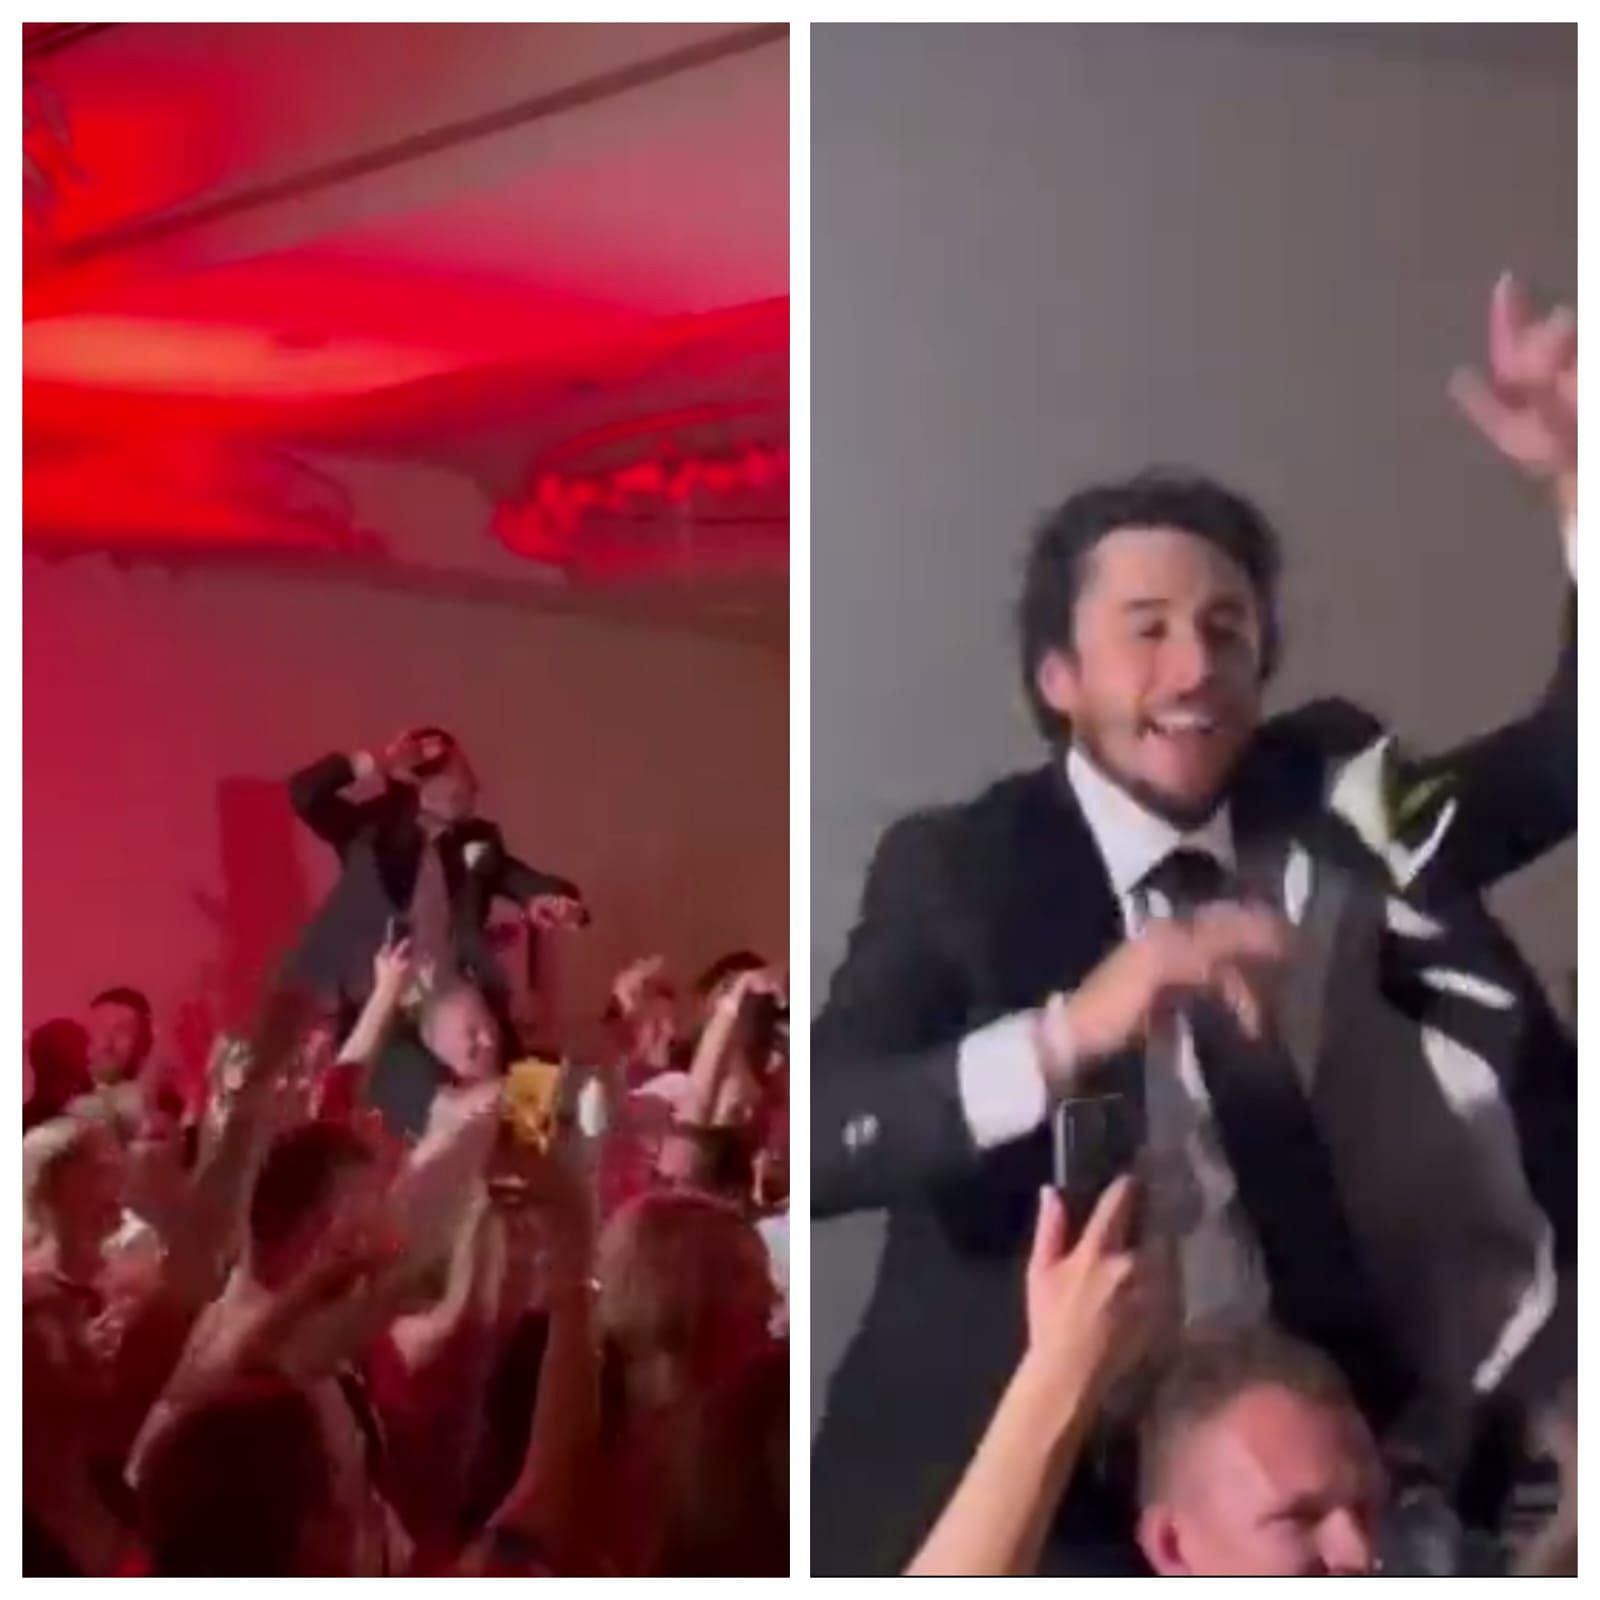 WATCH: Johnny Gaudreau spotted dancing away on Brady Tkachuk's shoulders  during Kevin Hayes' wedding